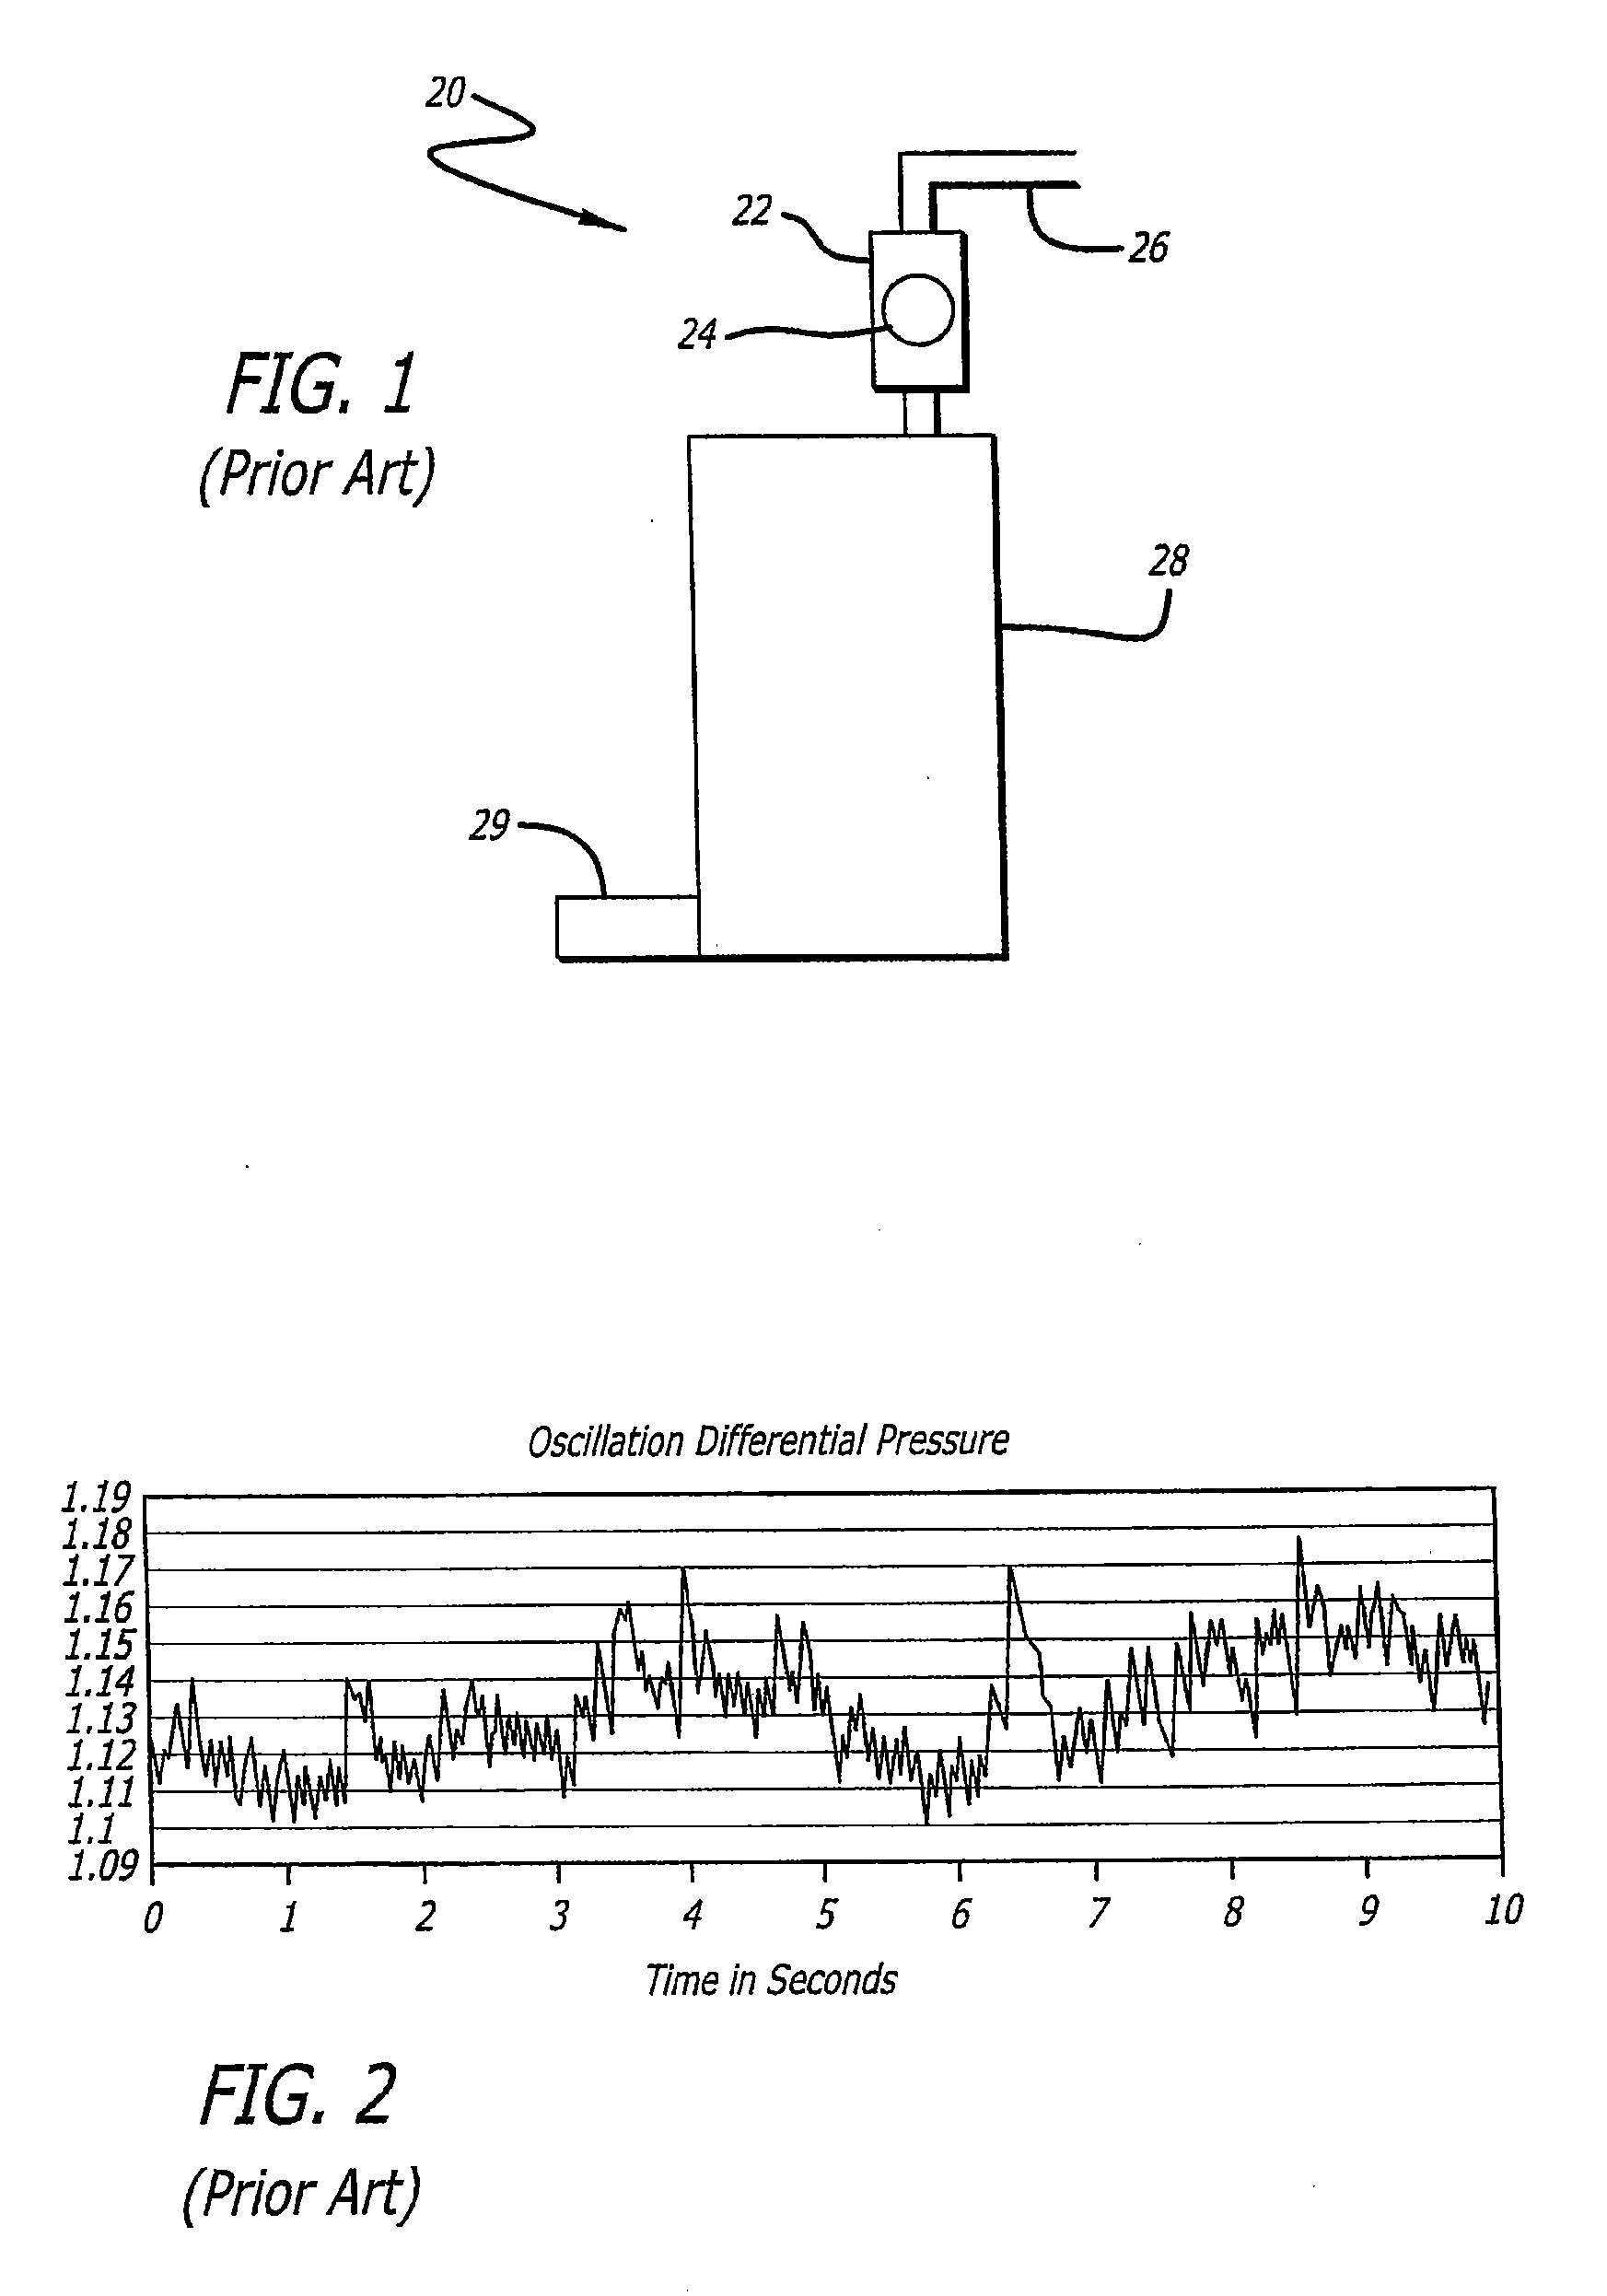 Air vent valve for beverage makers